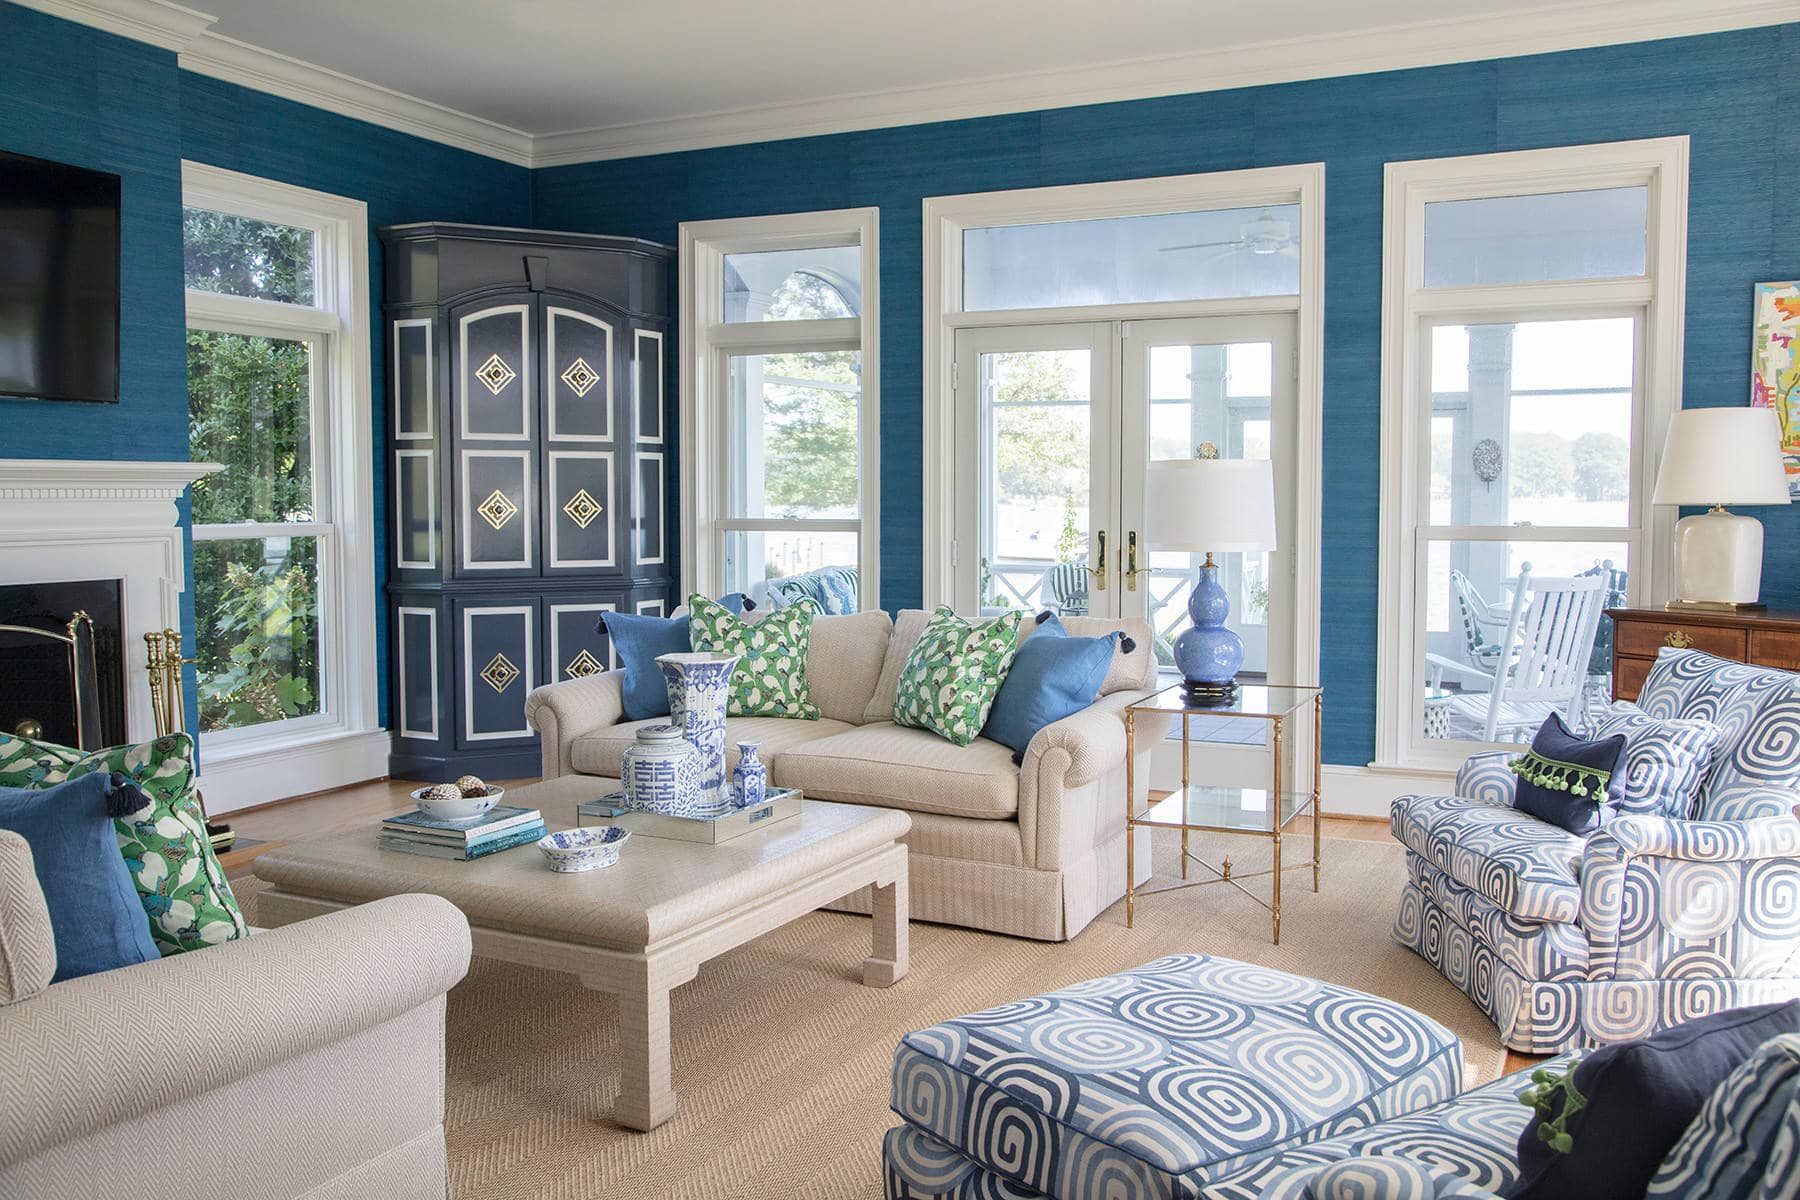 Home tour featuring living room in traditional style featuring blue walls